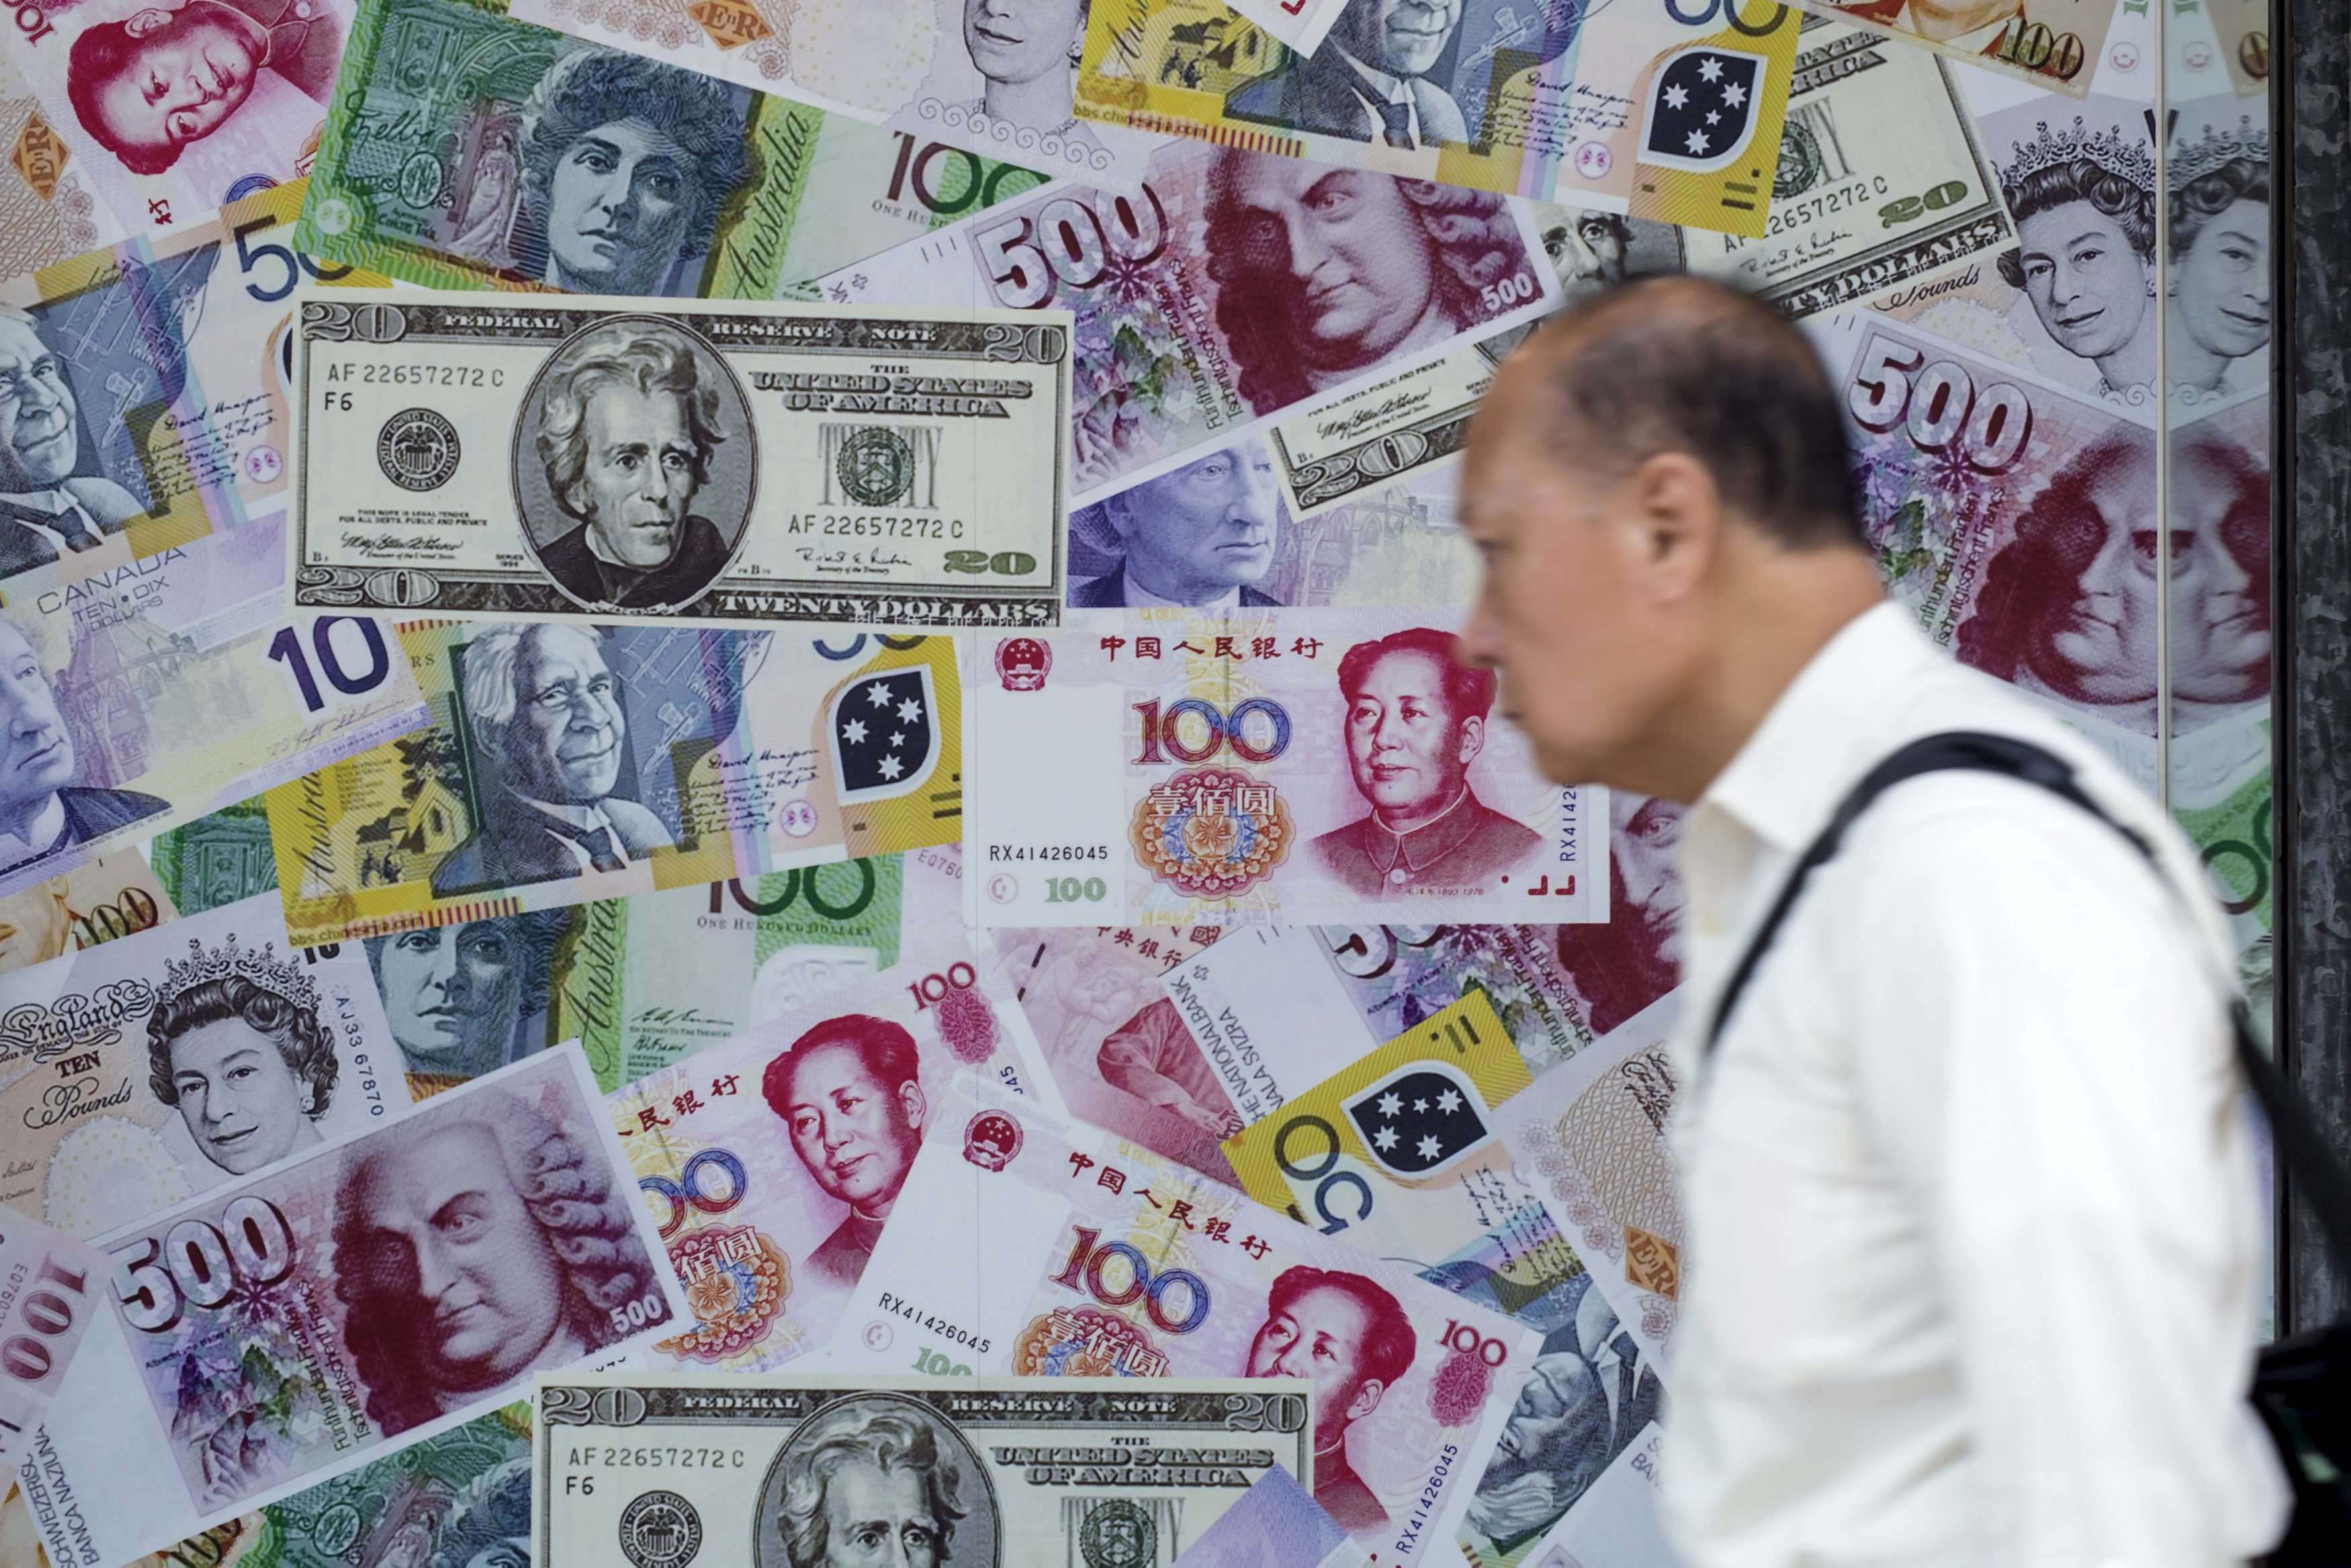 A man walks past an advertisement promoting China's renminbi (RMB) or yuan, U.S. dollar and Euro exchange services at a foreign exchange store in Hong Kong. China’s government bonds tumbled by their daily allowable limits on Thursday after the US Fed foreshadowed three possible interest rate increases in 2017, one more than consensus. Photo: Reuters